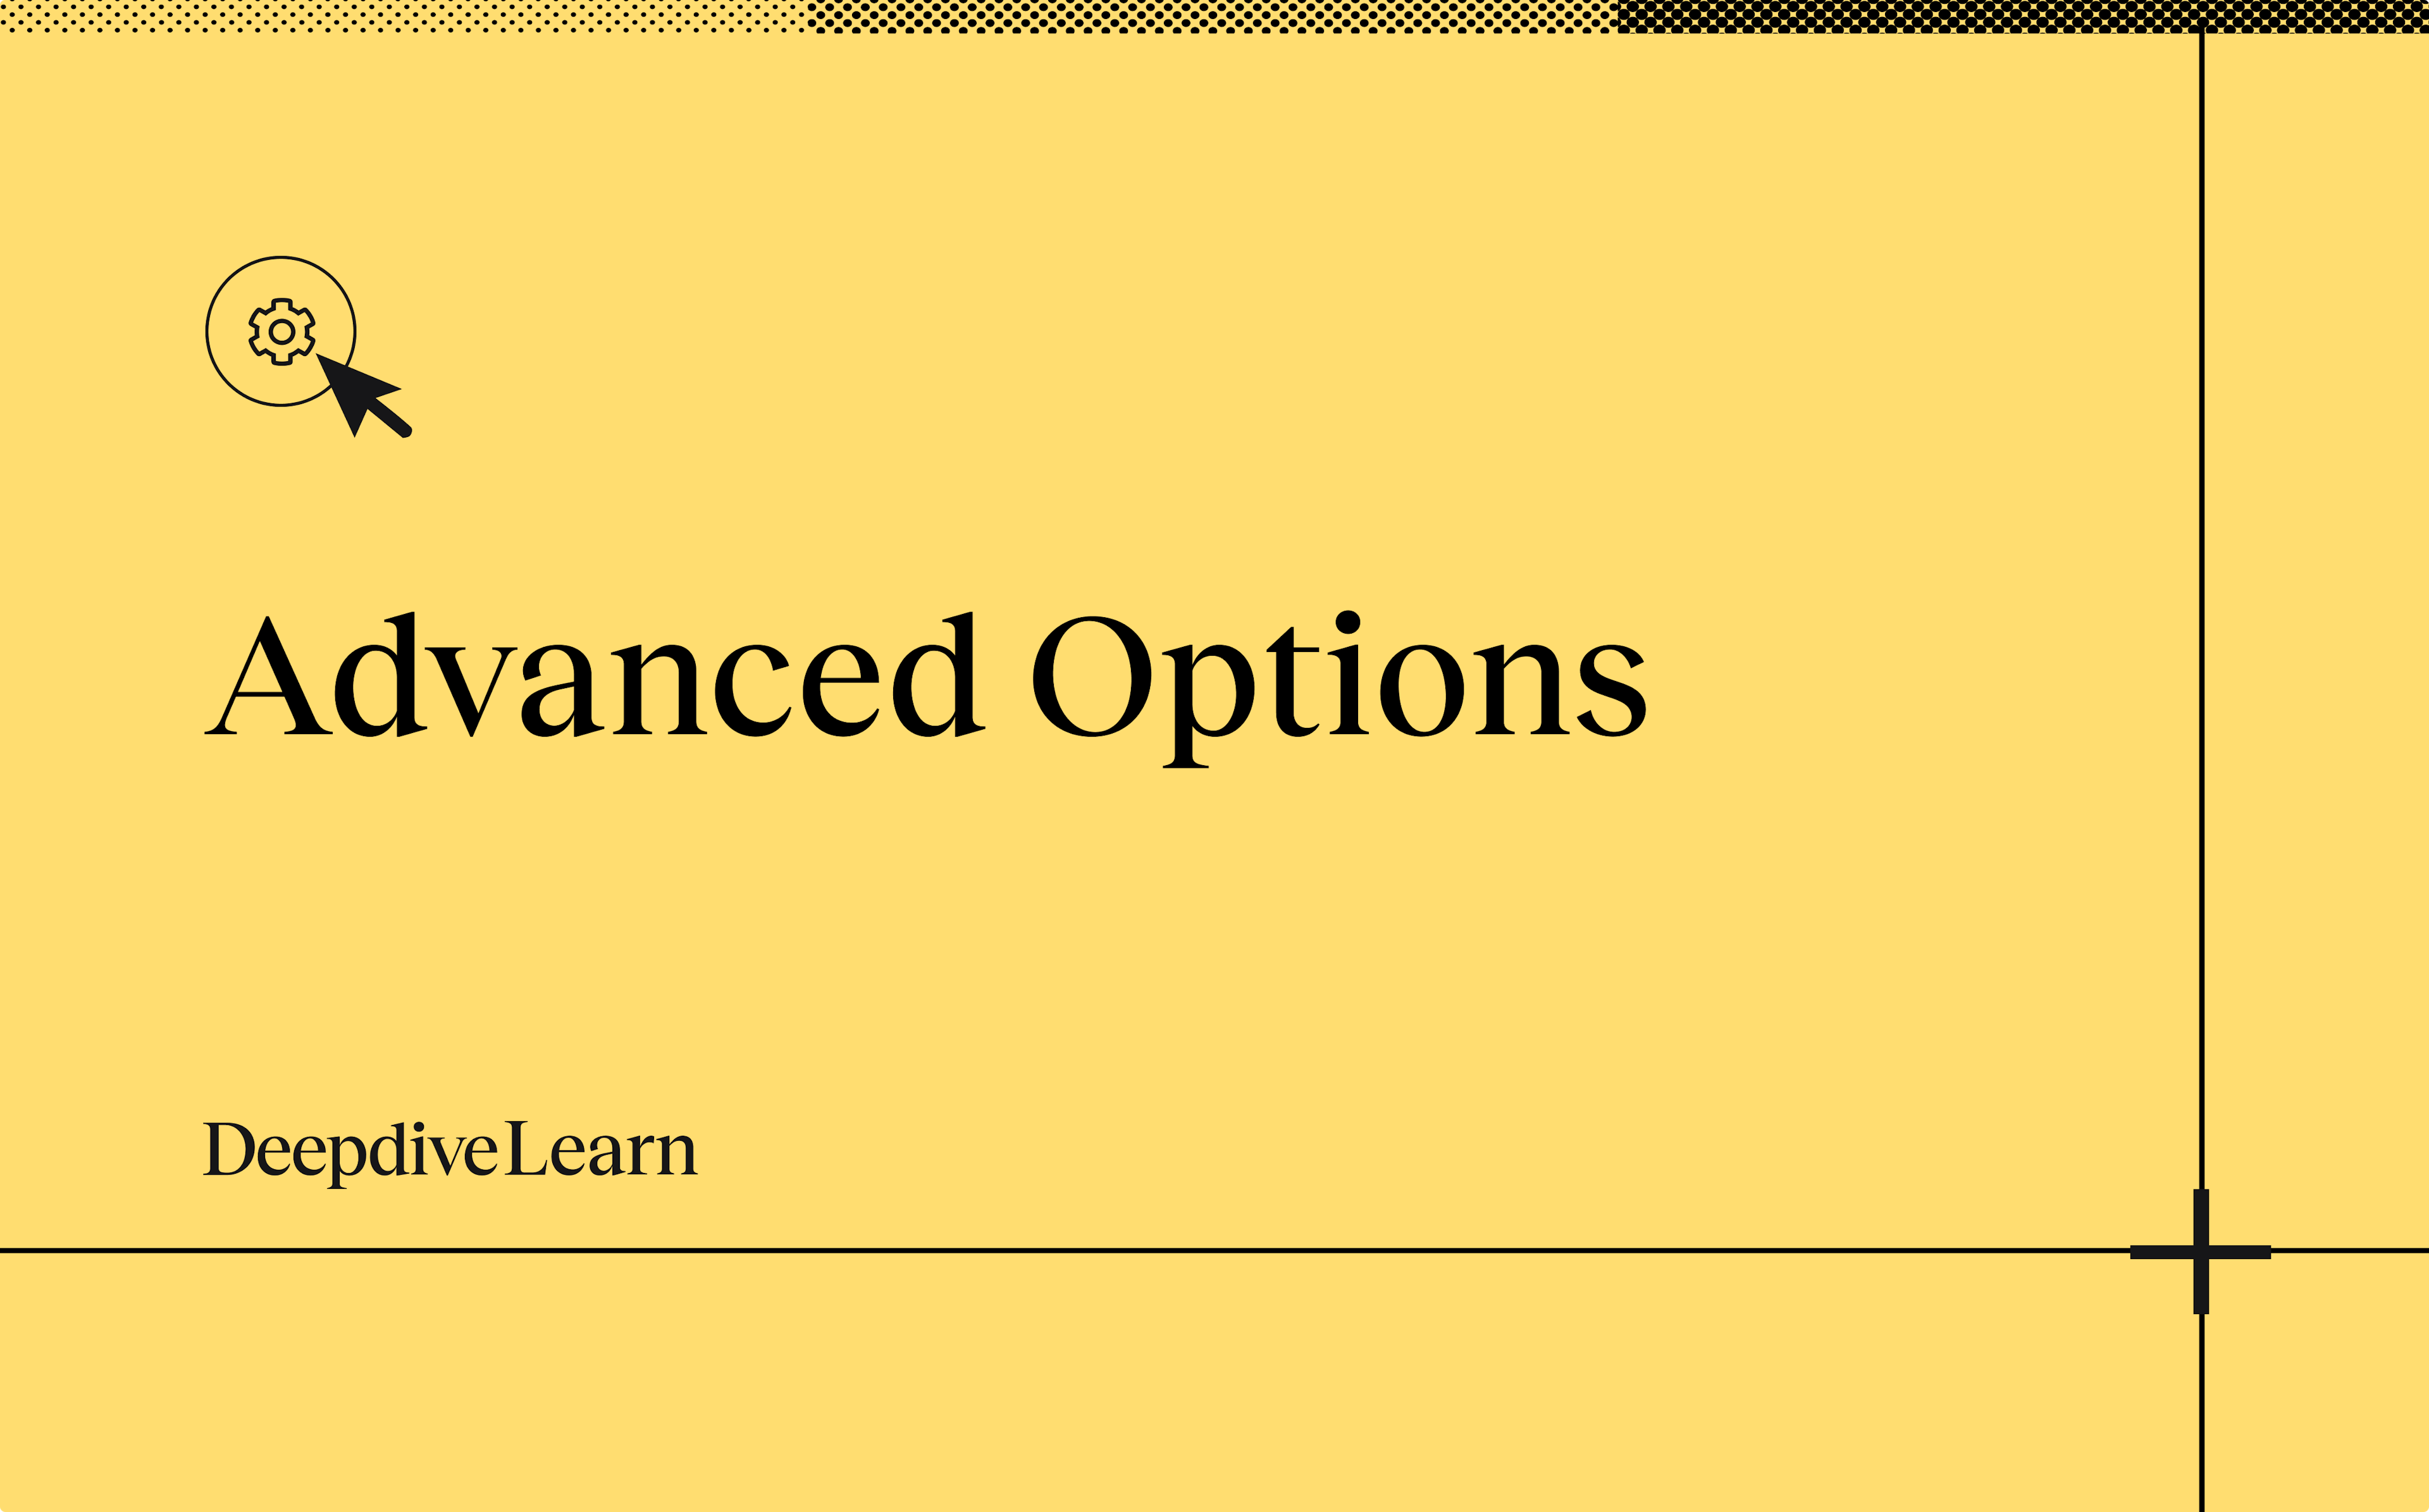 Advanced Options by Deepdive Learn